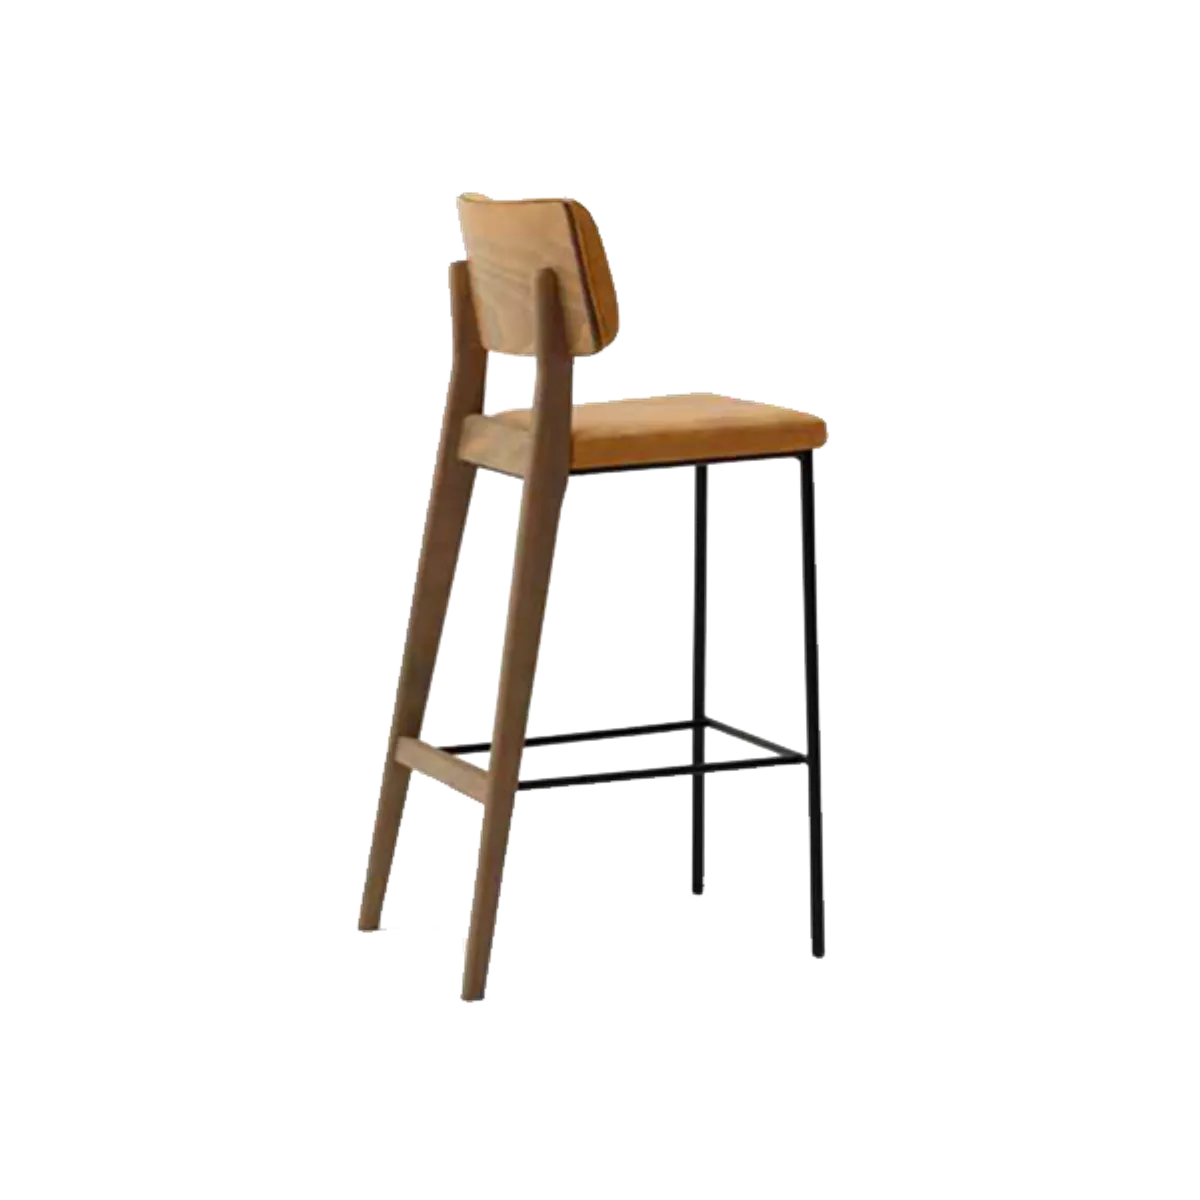 Bay Bar Stool Inside Out Contracts